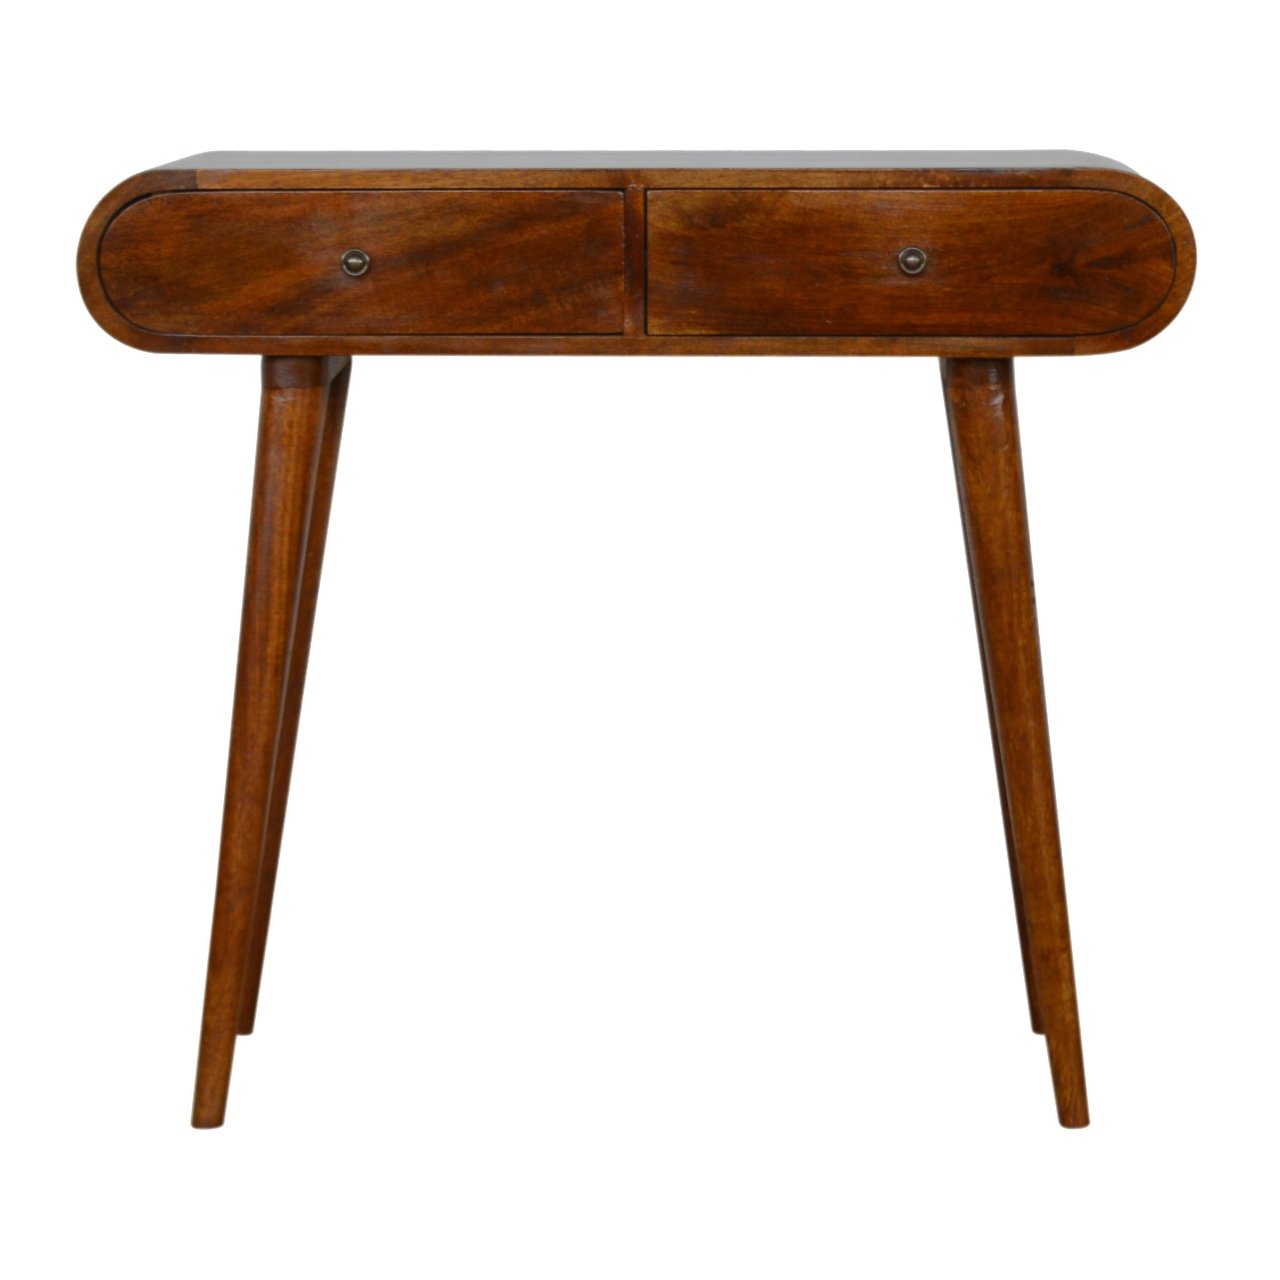 View Chestnut London Console Table information